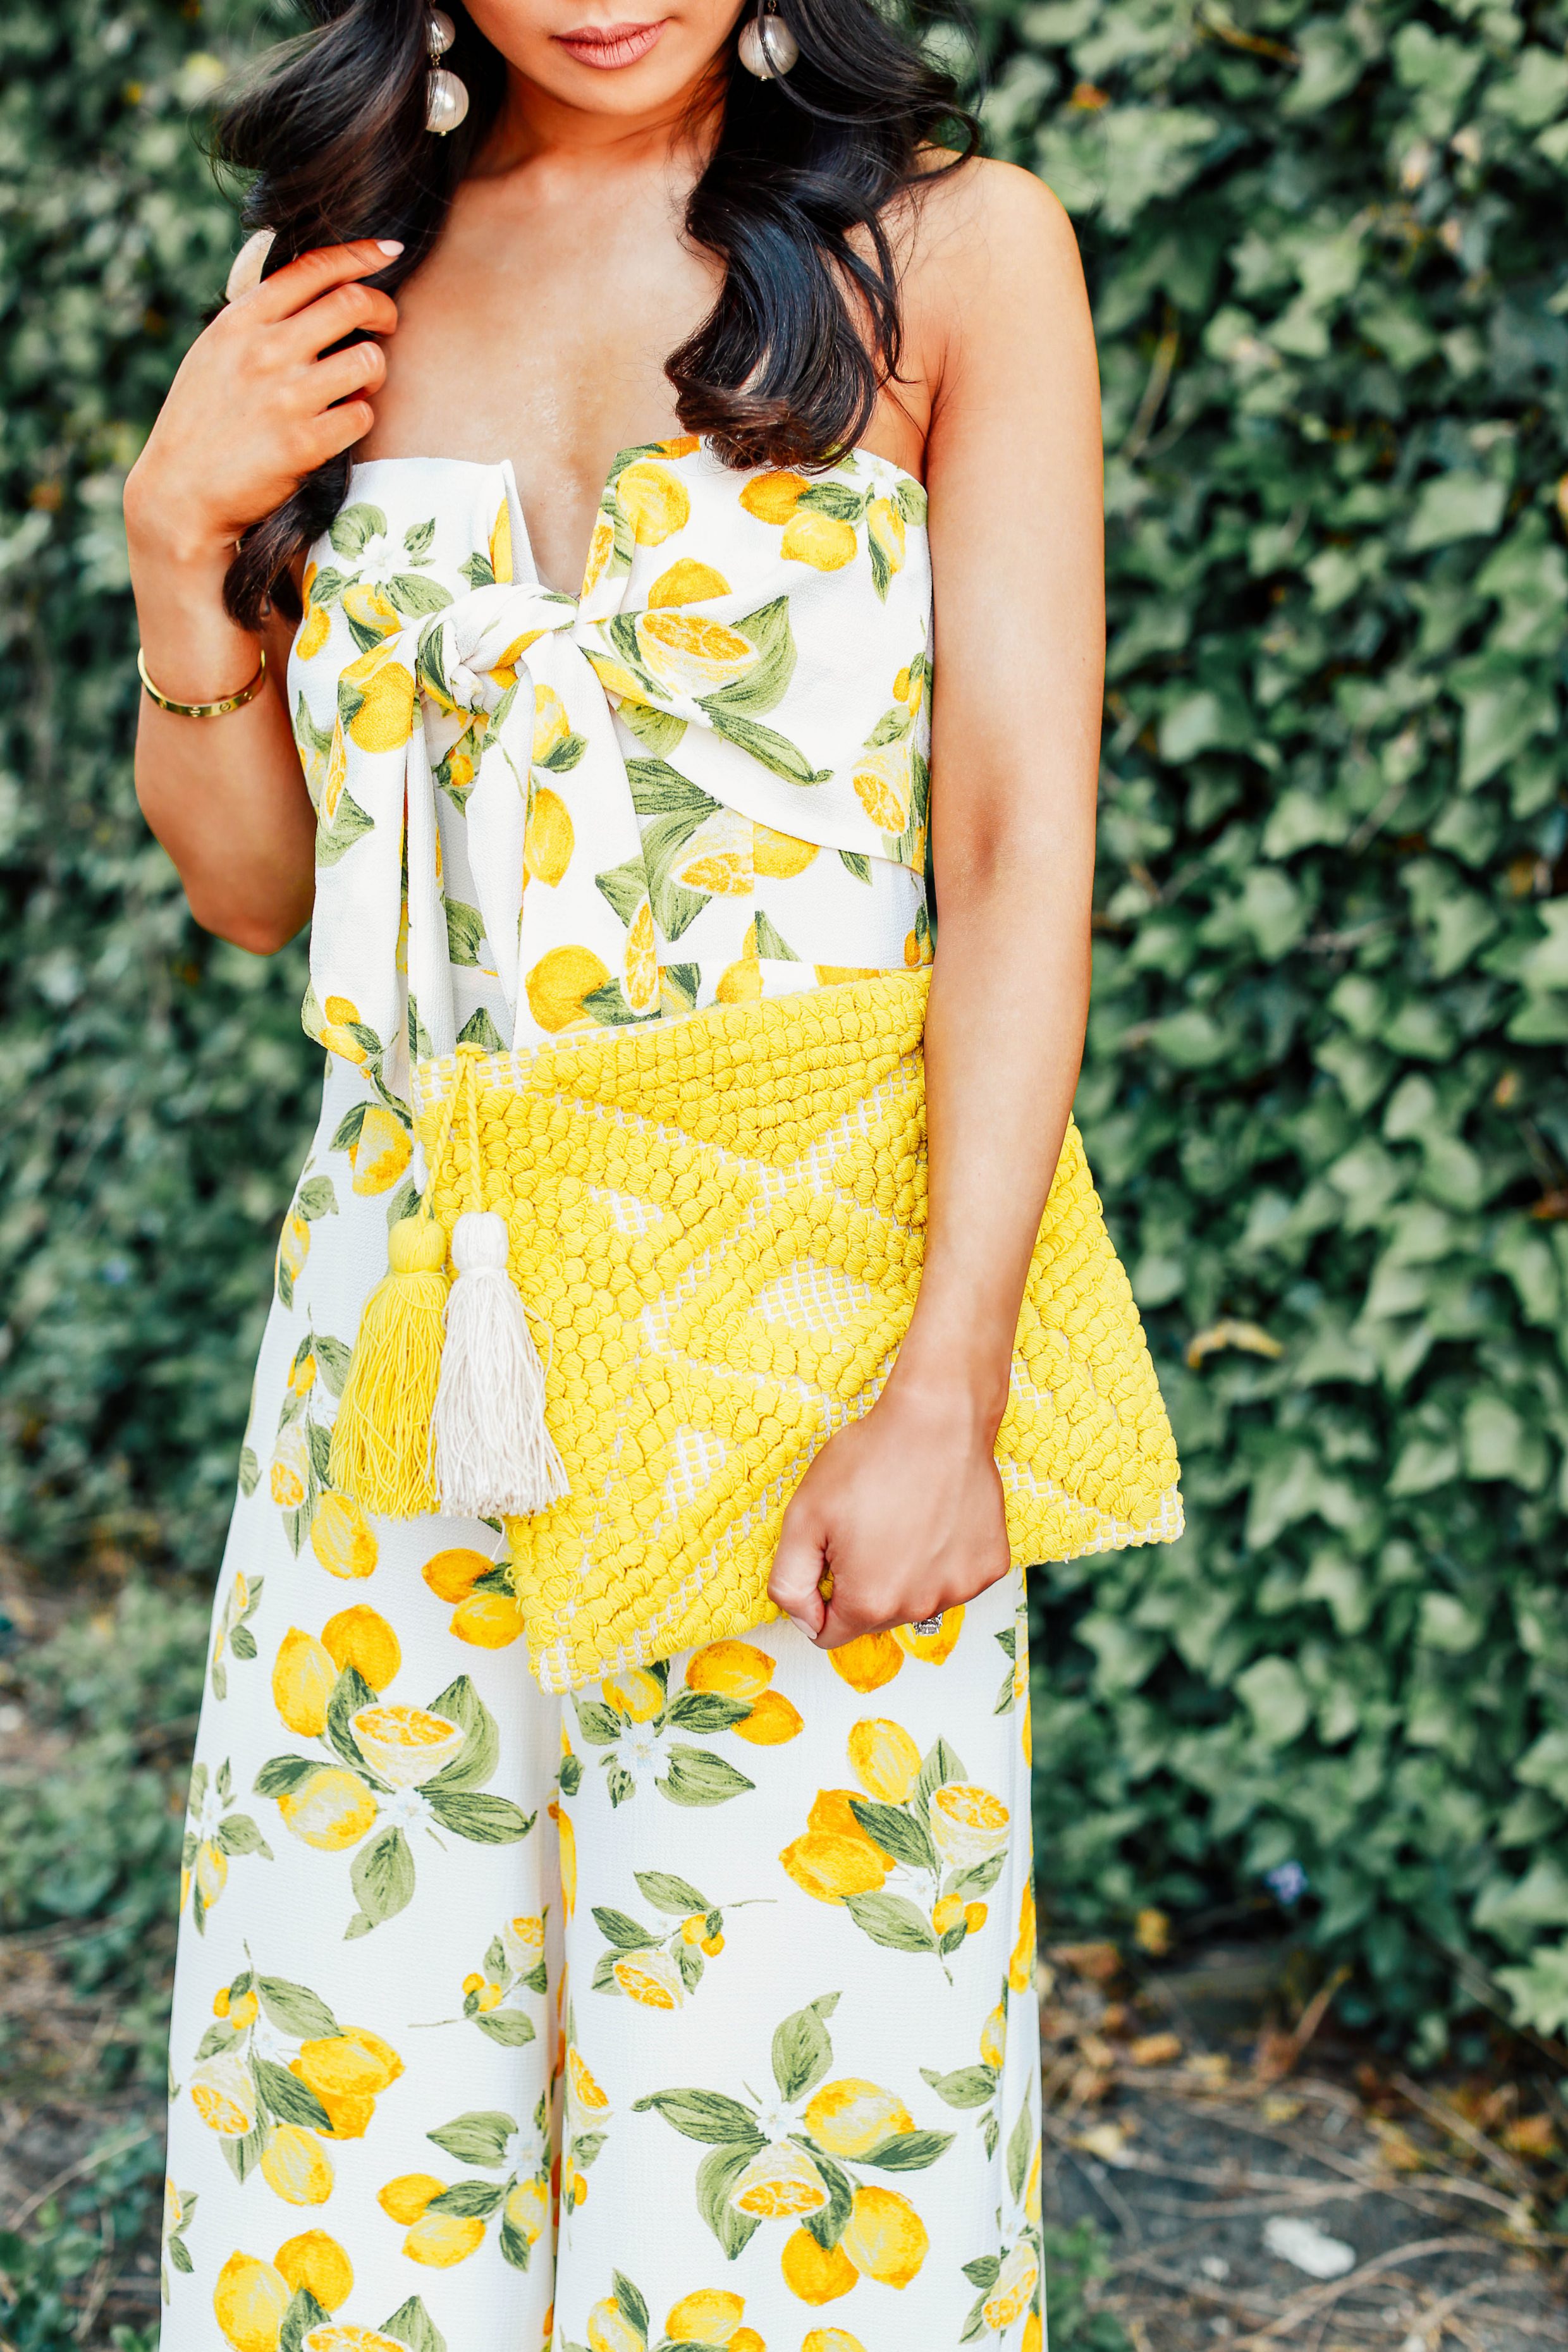 Lemon print jumpsuit, perfect for a summer outfit of the day